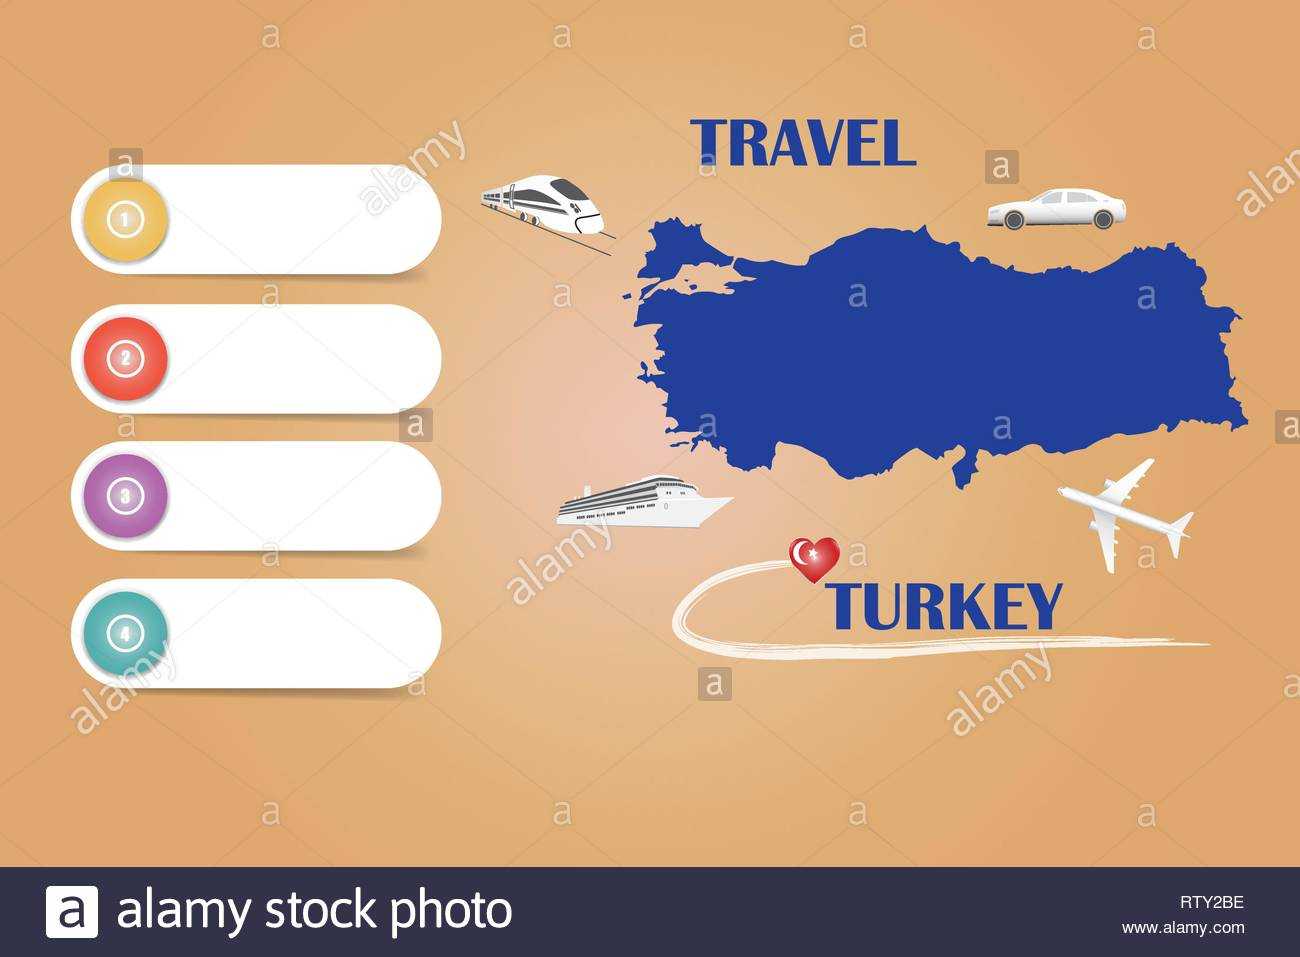 Travel Turkey Template Vector For Travel Agencies Etc For Blank Turkey Template